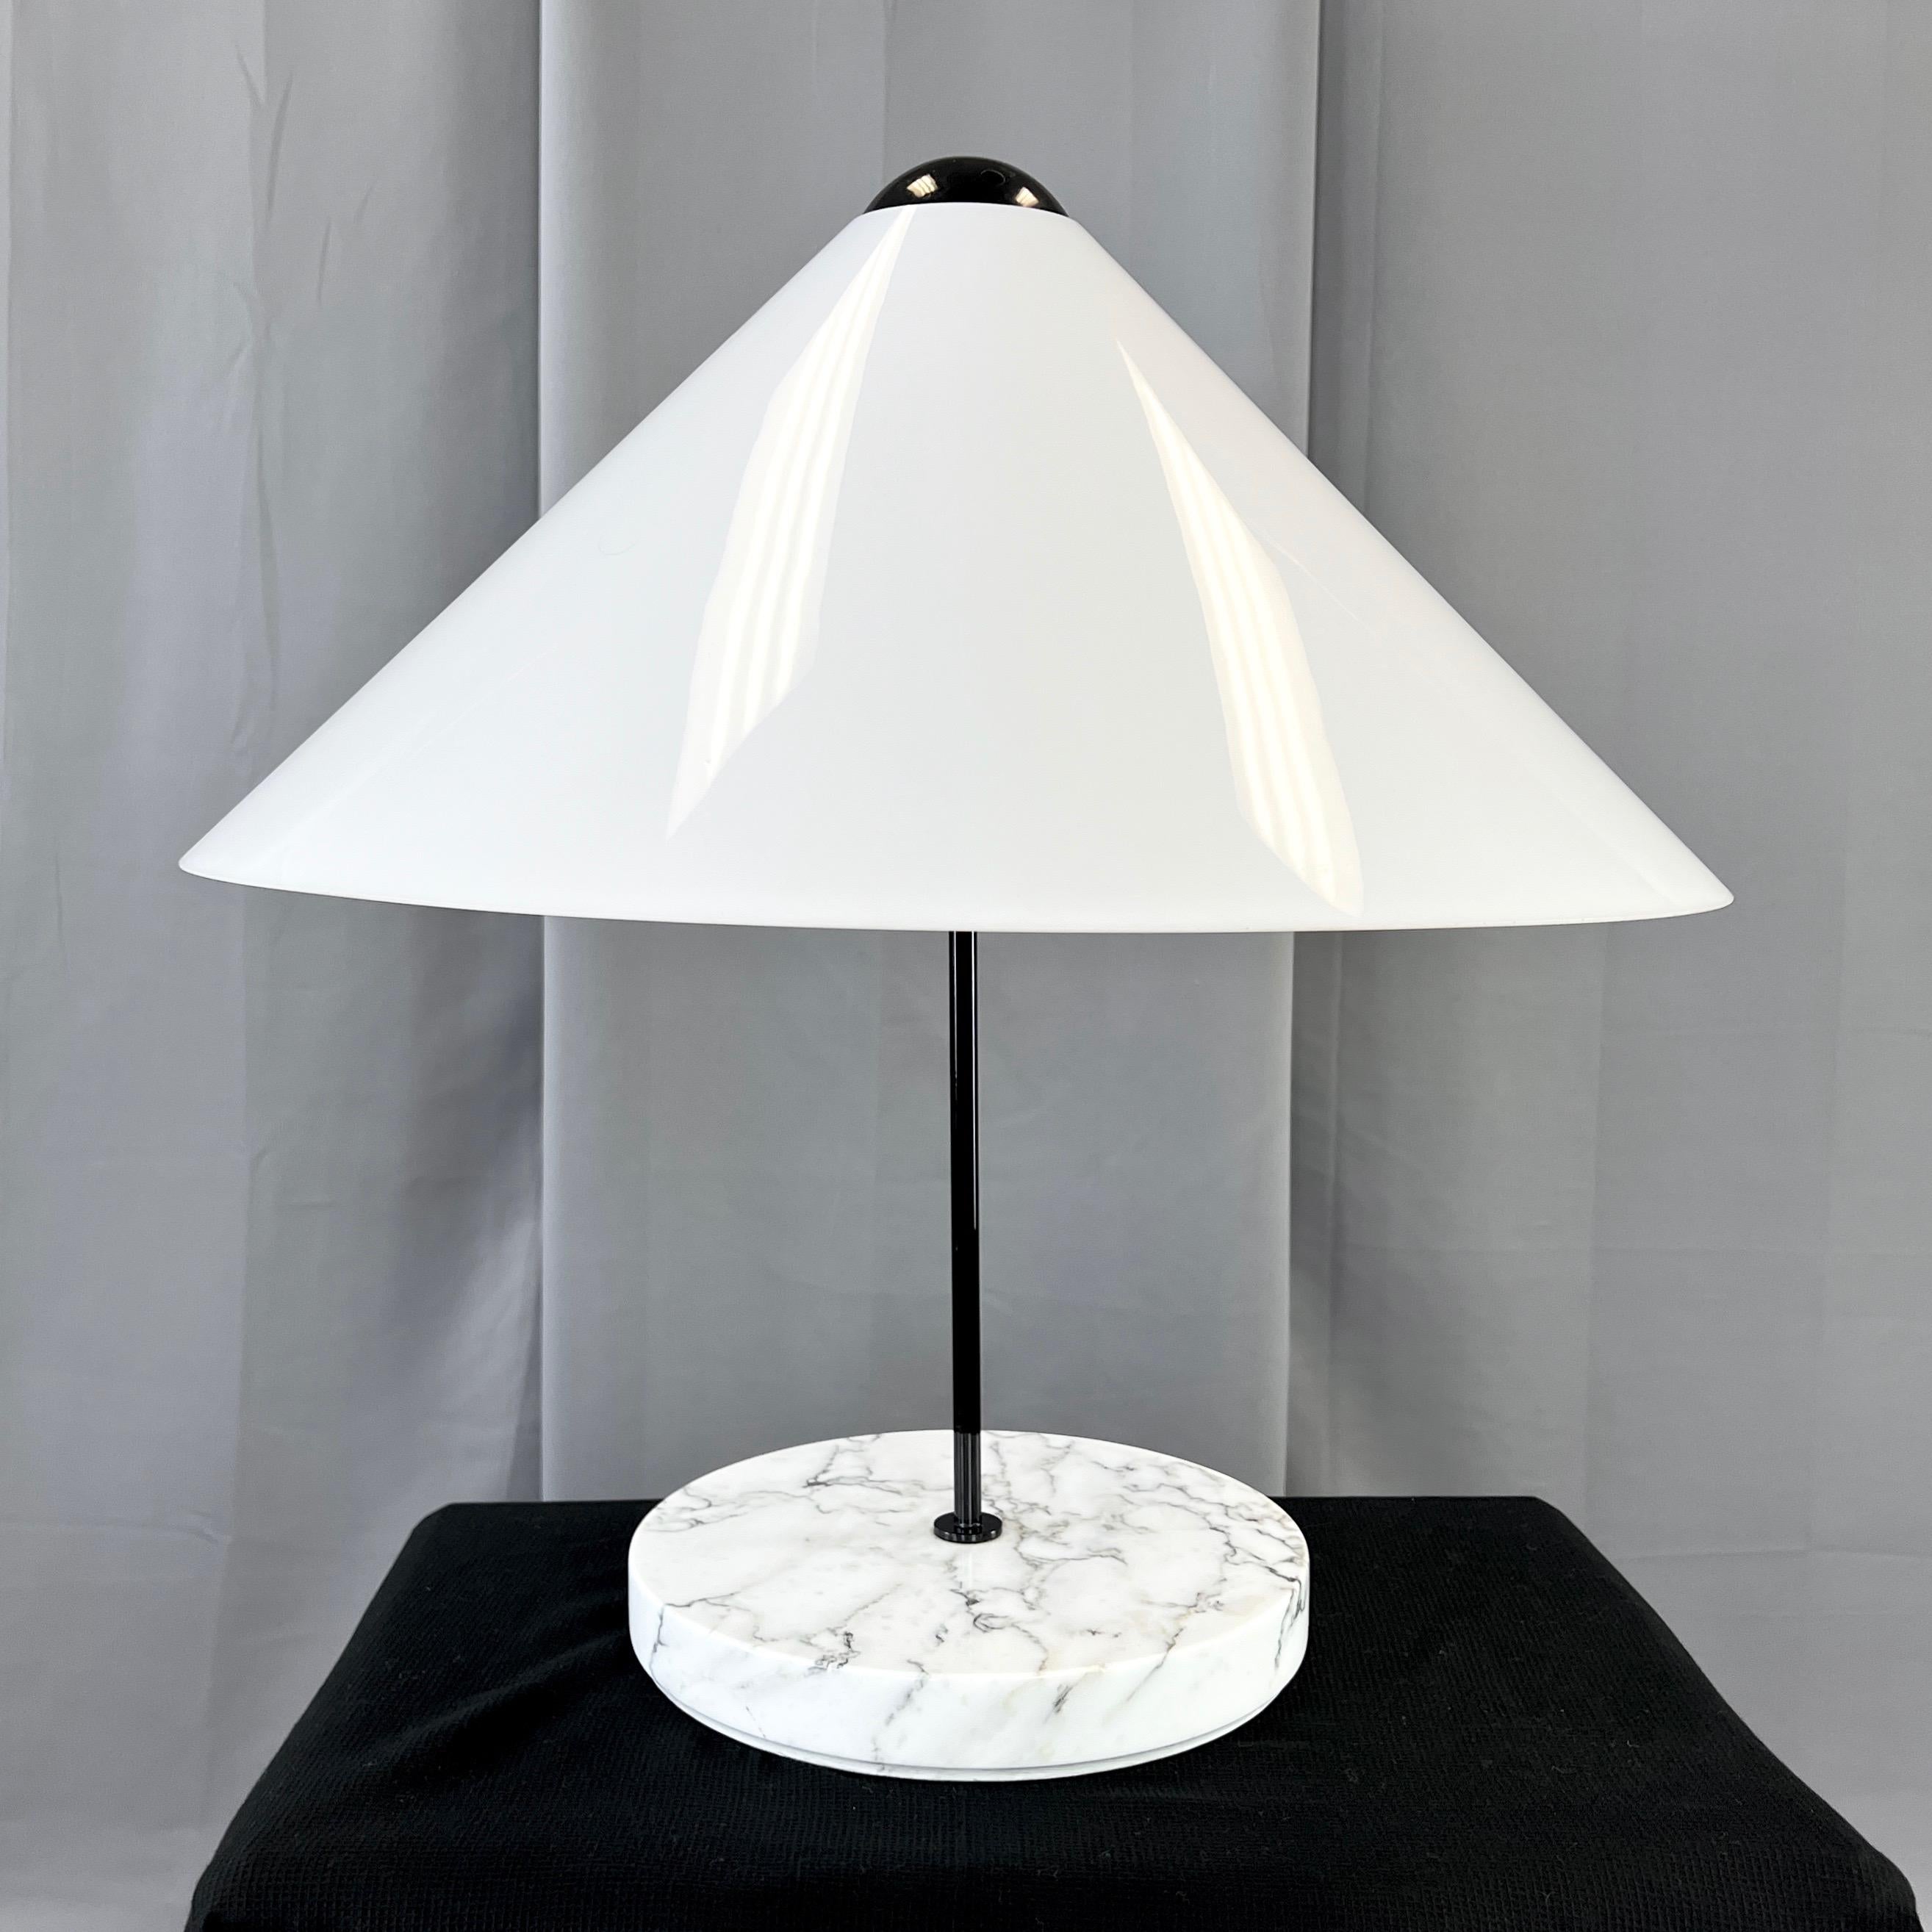 A 1973 postmodern Snow table lamp by Vico Magistretti for Oluce.

A very cool model 201 table lamp from Italian design icon Vico Magistretti’s Snow collection of lighting for Oluce—comprised of a table lamp, floor lamp, and pedant—that was only in